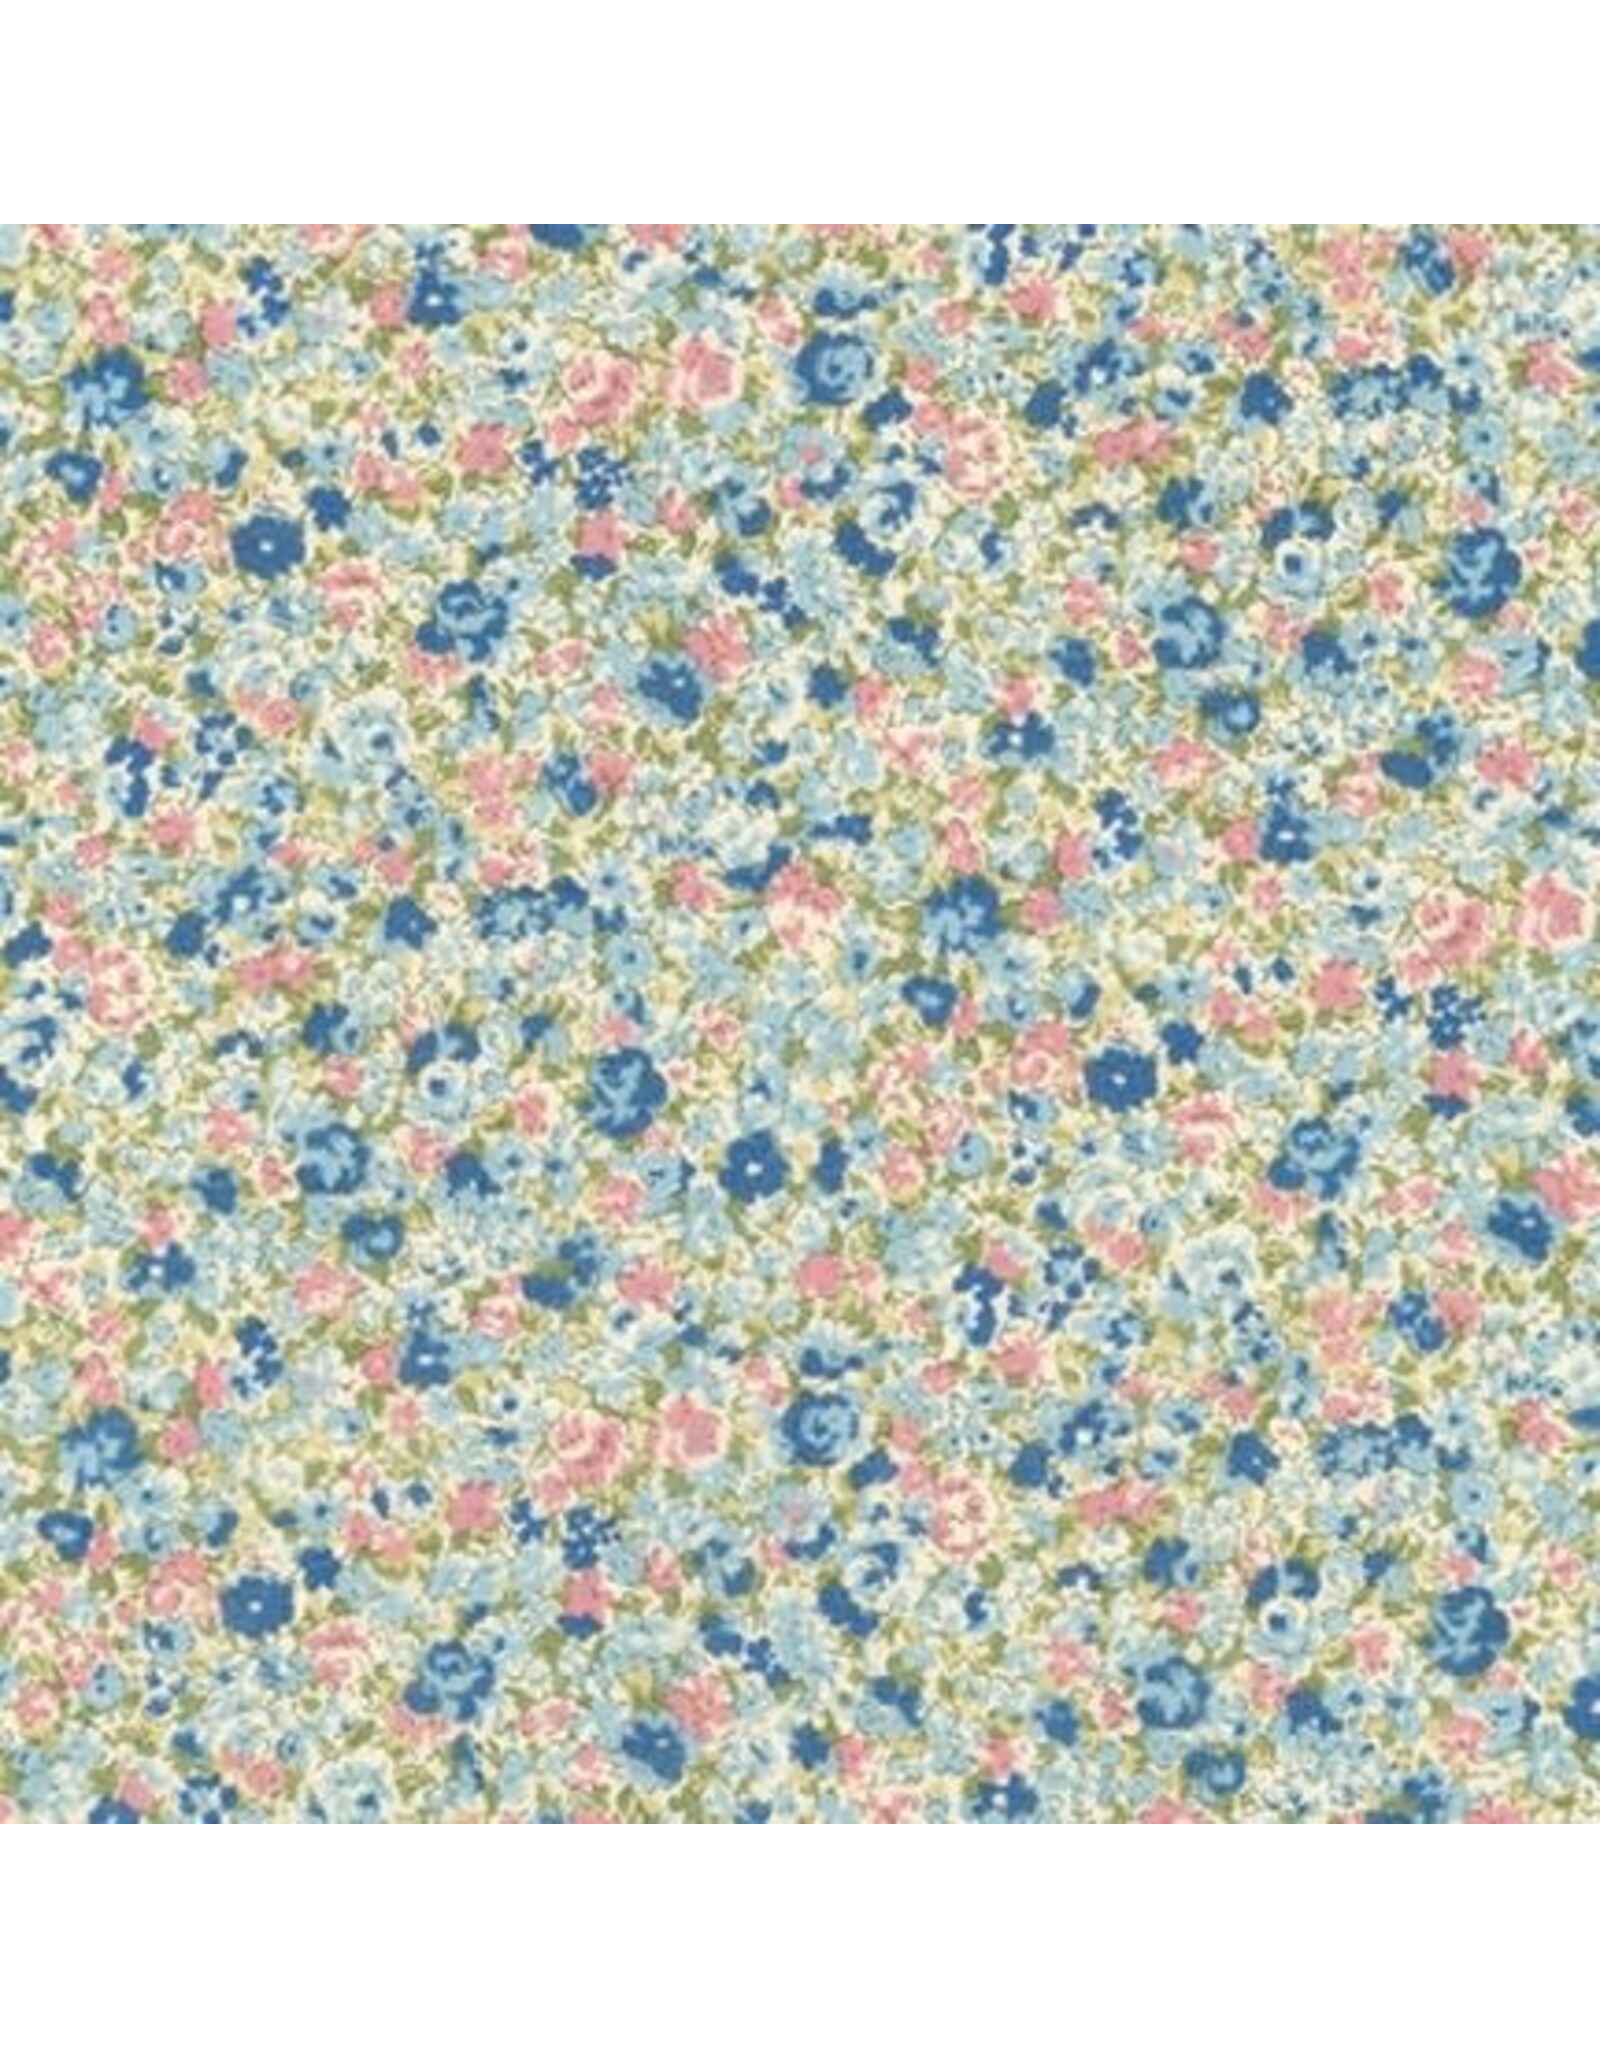 Sevenberry Cotton Lawn, Petite Garden Lawn in Sky with Blue, Fabric Half-Yards